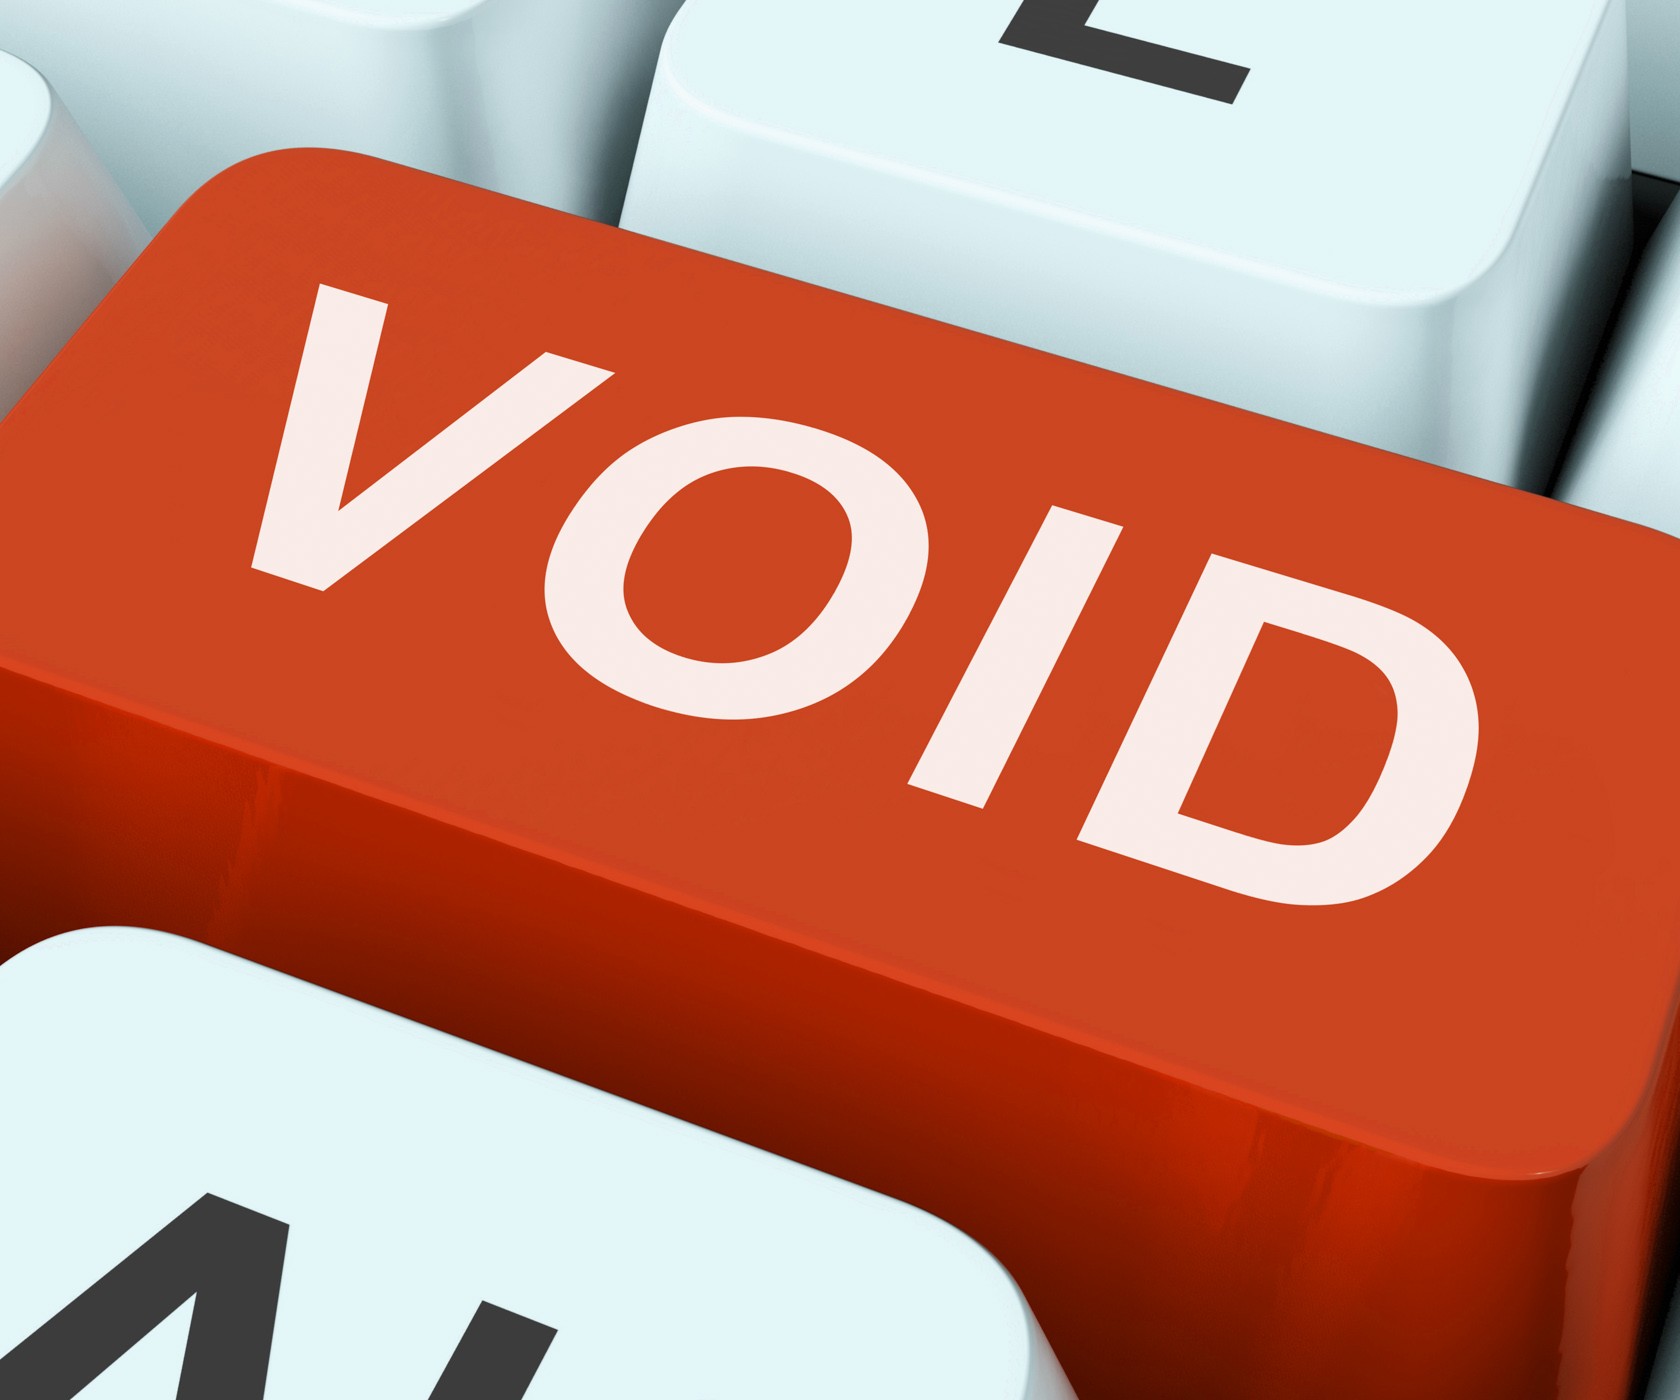 Void key shows invalid or invalidated contract photo